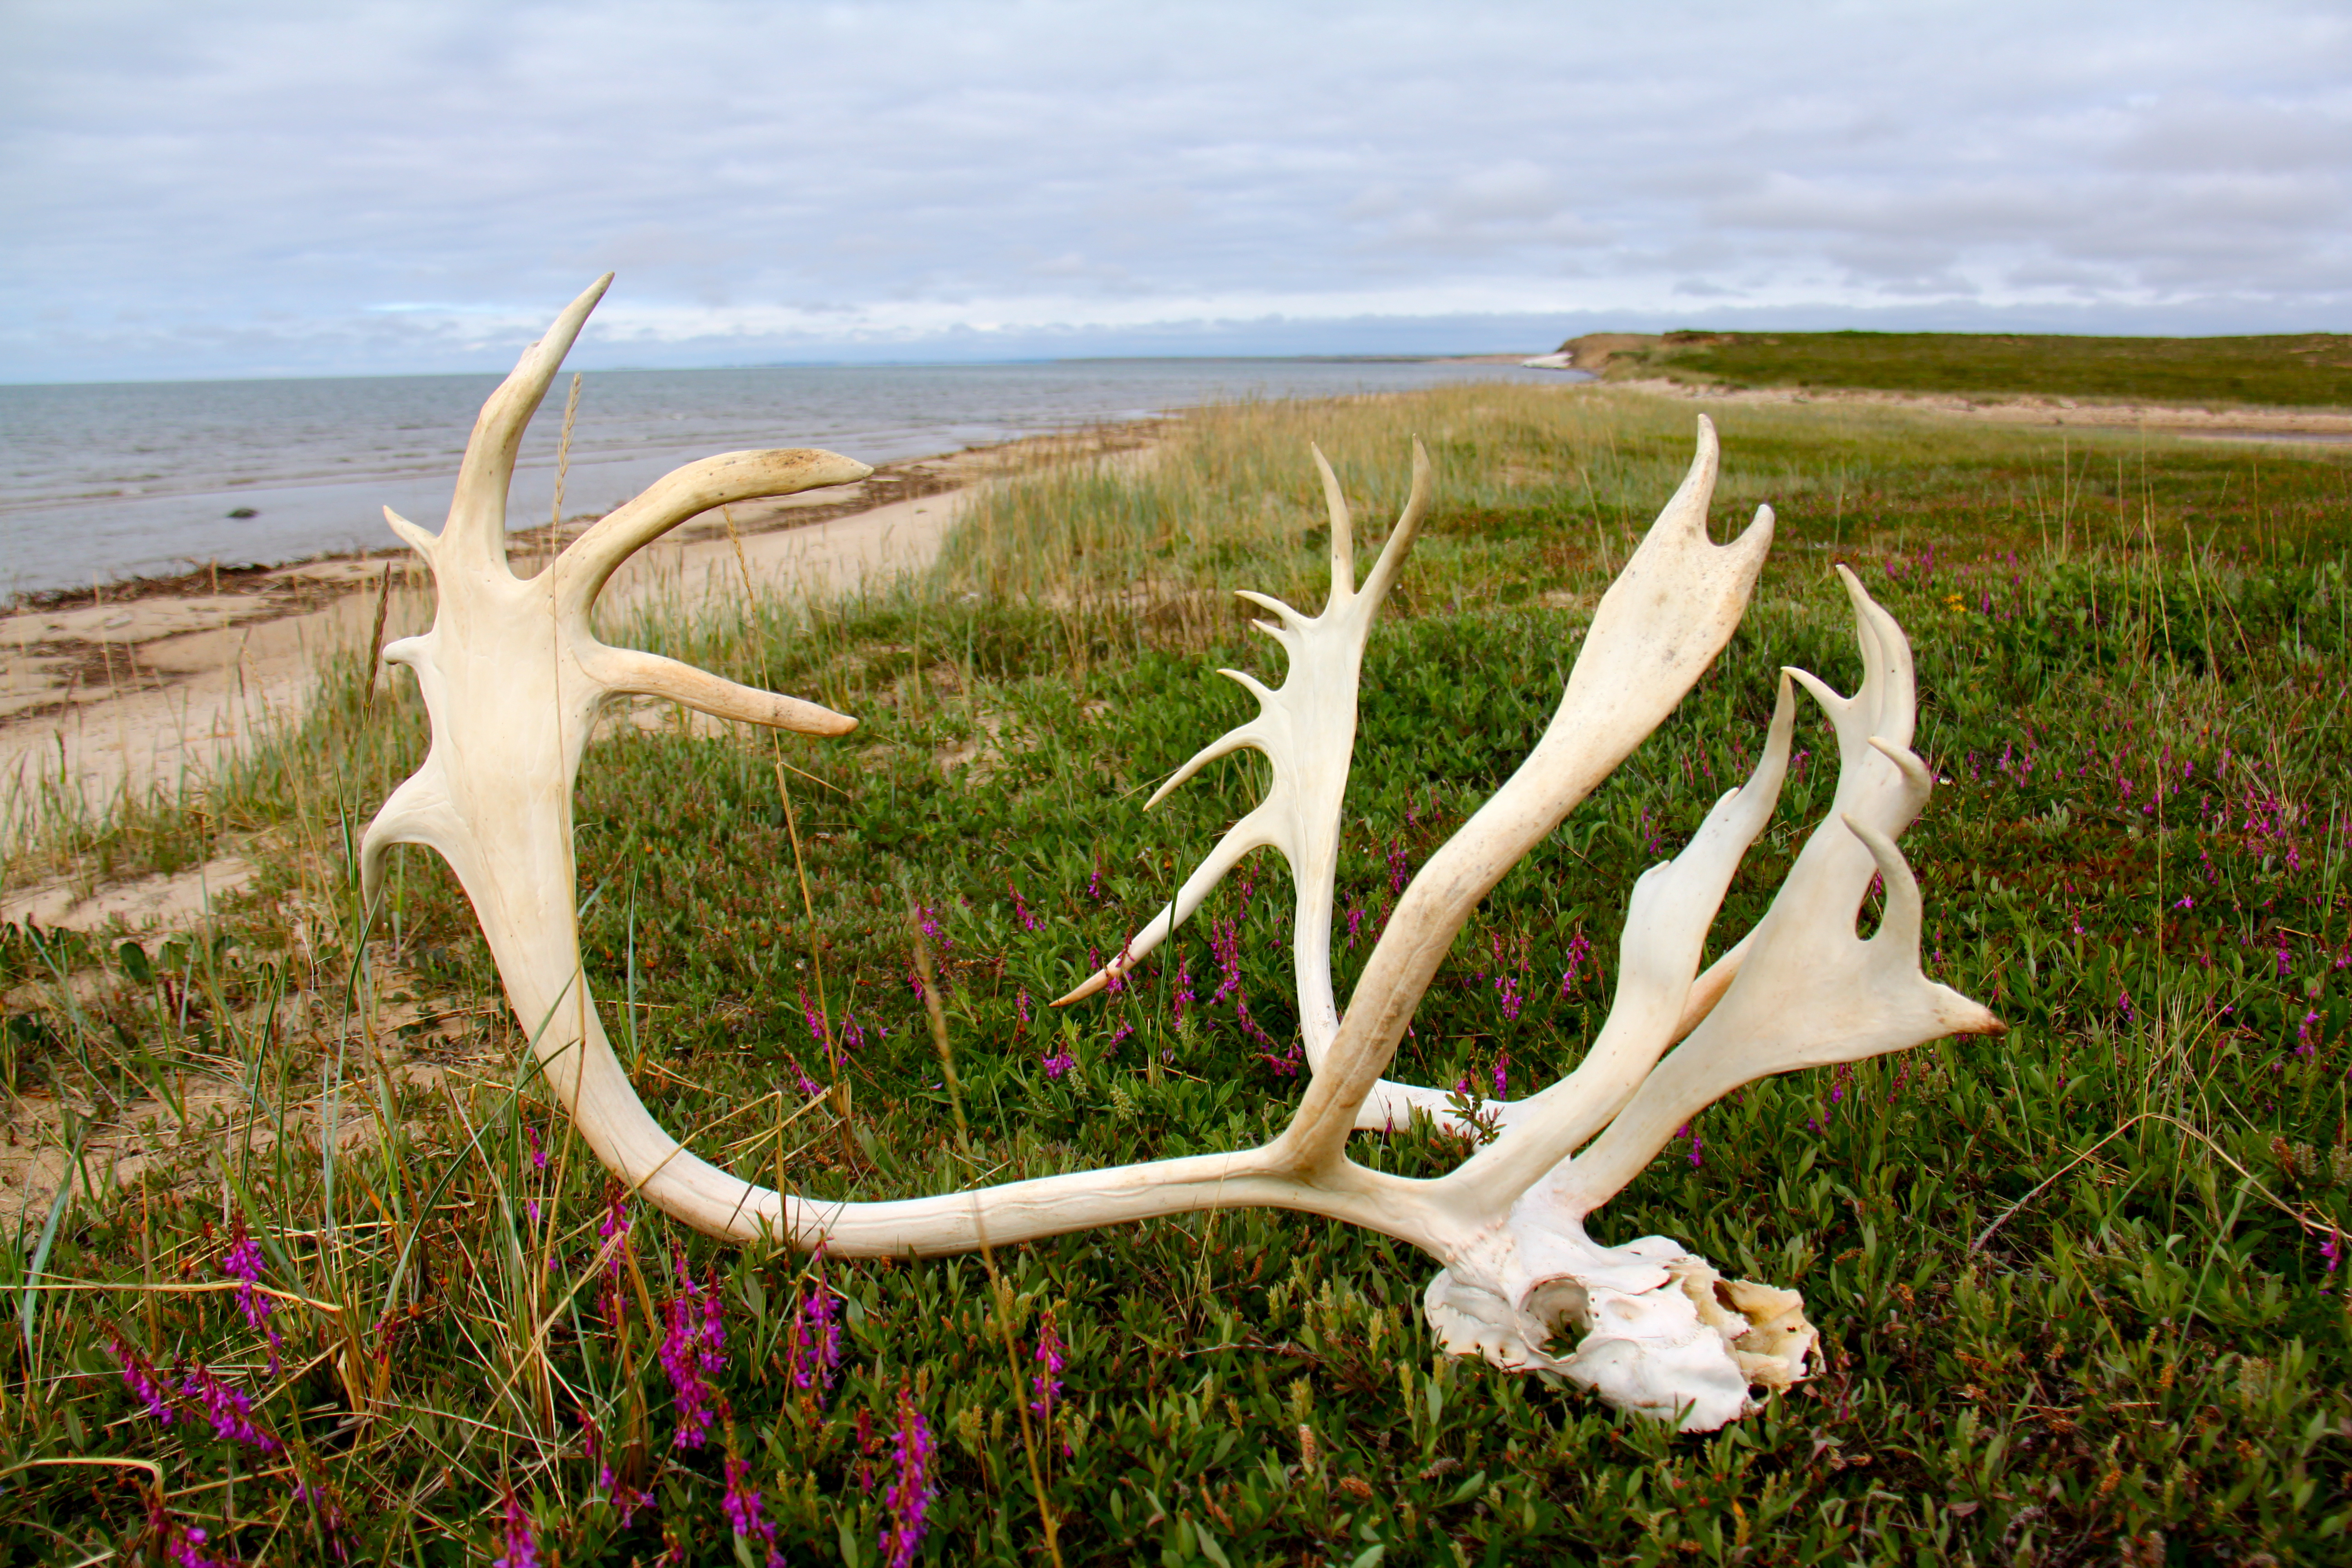 A caribou skull among wildflowers on the bay.